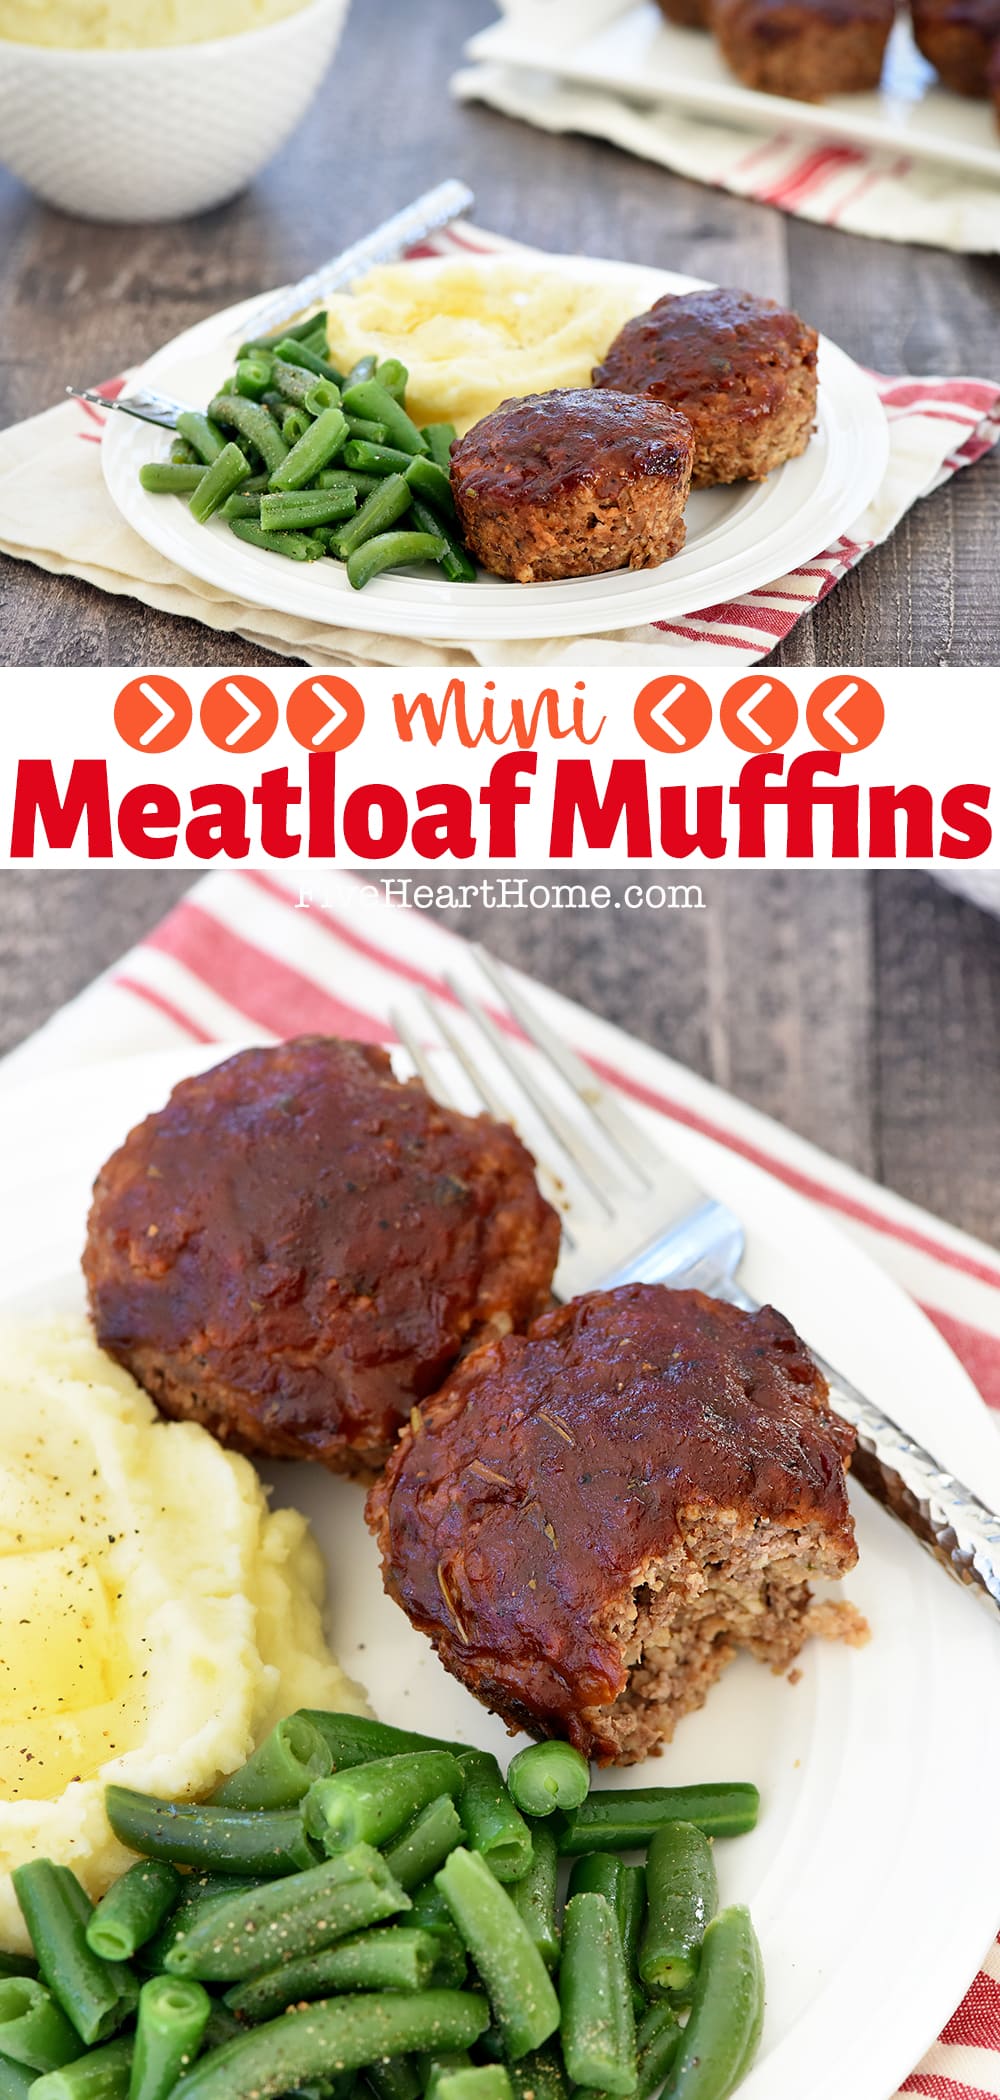 Mini Meatloaf Recipe ~ an easy, yummy, family-favorite dinner of tender meatloaf muffins with flavorful glaze that cook in a fraction of the time thanks to muffin pans! | FiveHeartHome.com via @fivehearthome